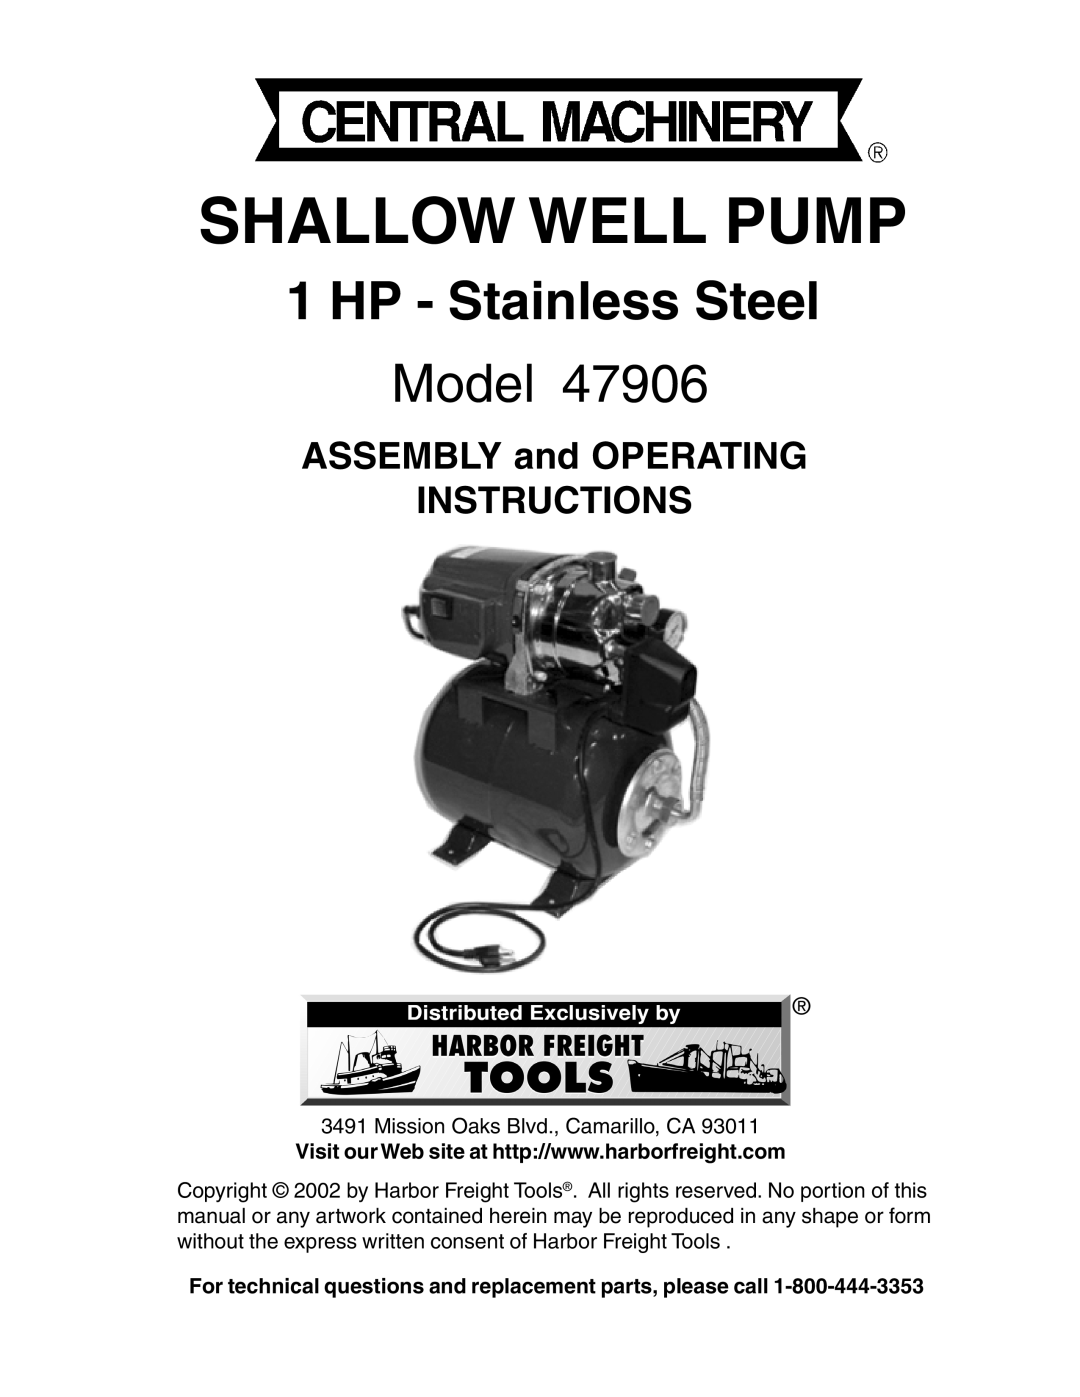 Harbor Freight Tools 47906 manual Shallow Well Pump, HP - Stainless Steel, Model, ASSEMBLY and OPERATING INSTRUCTIONS 